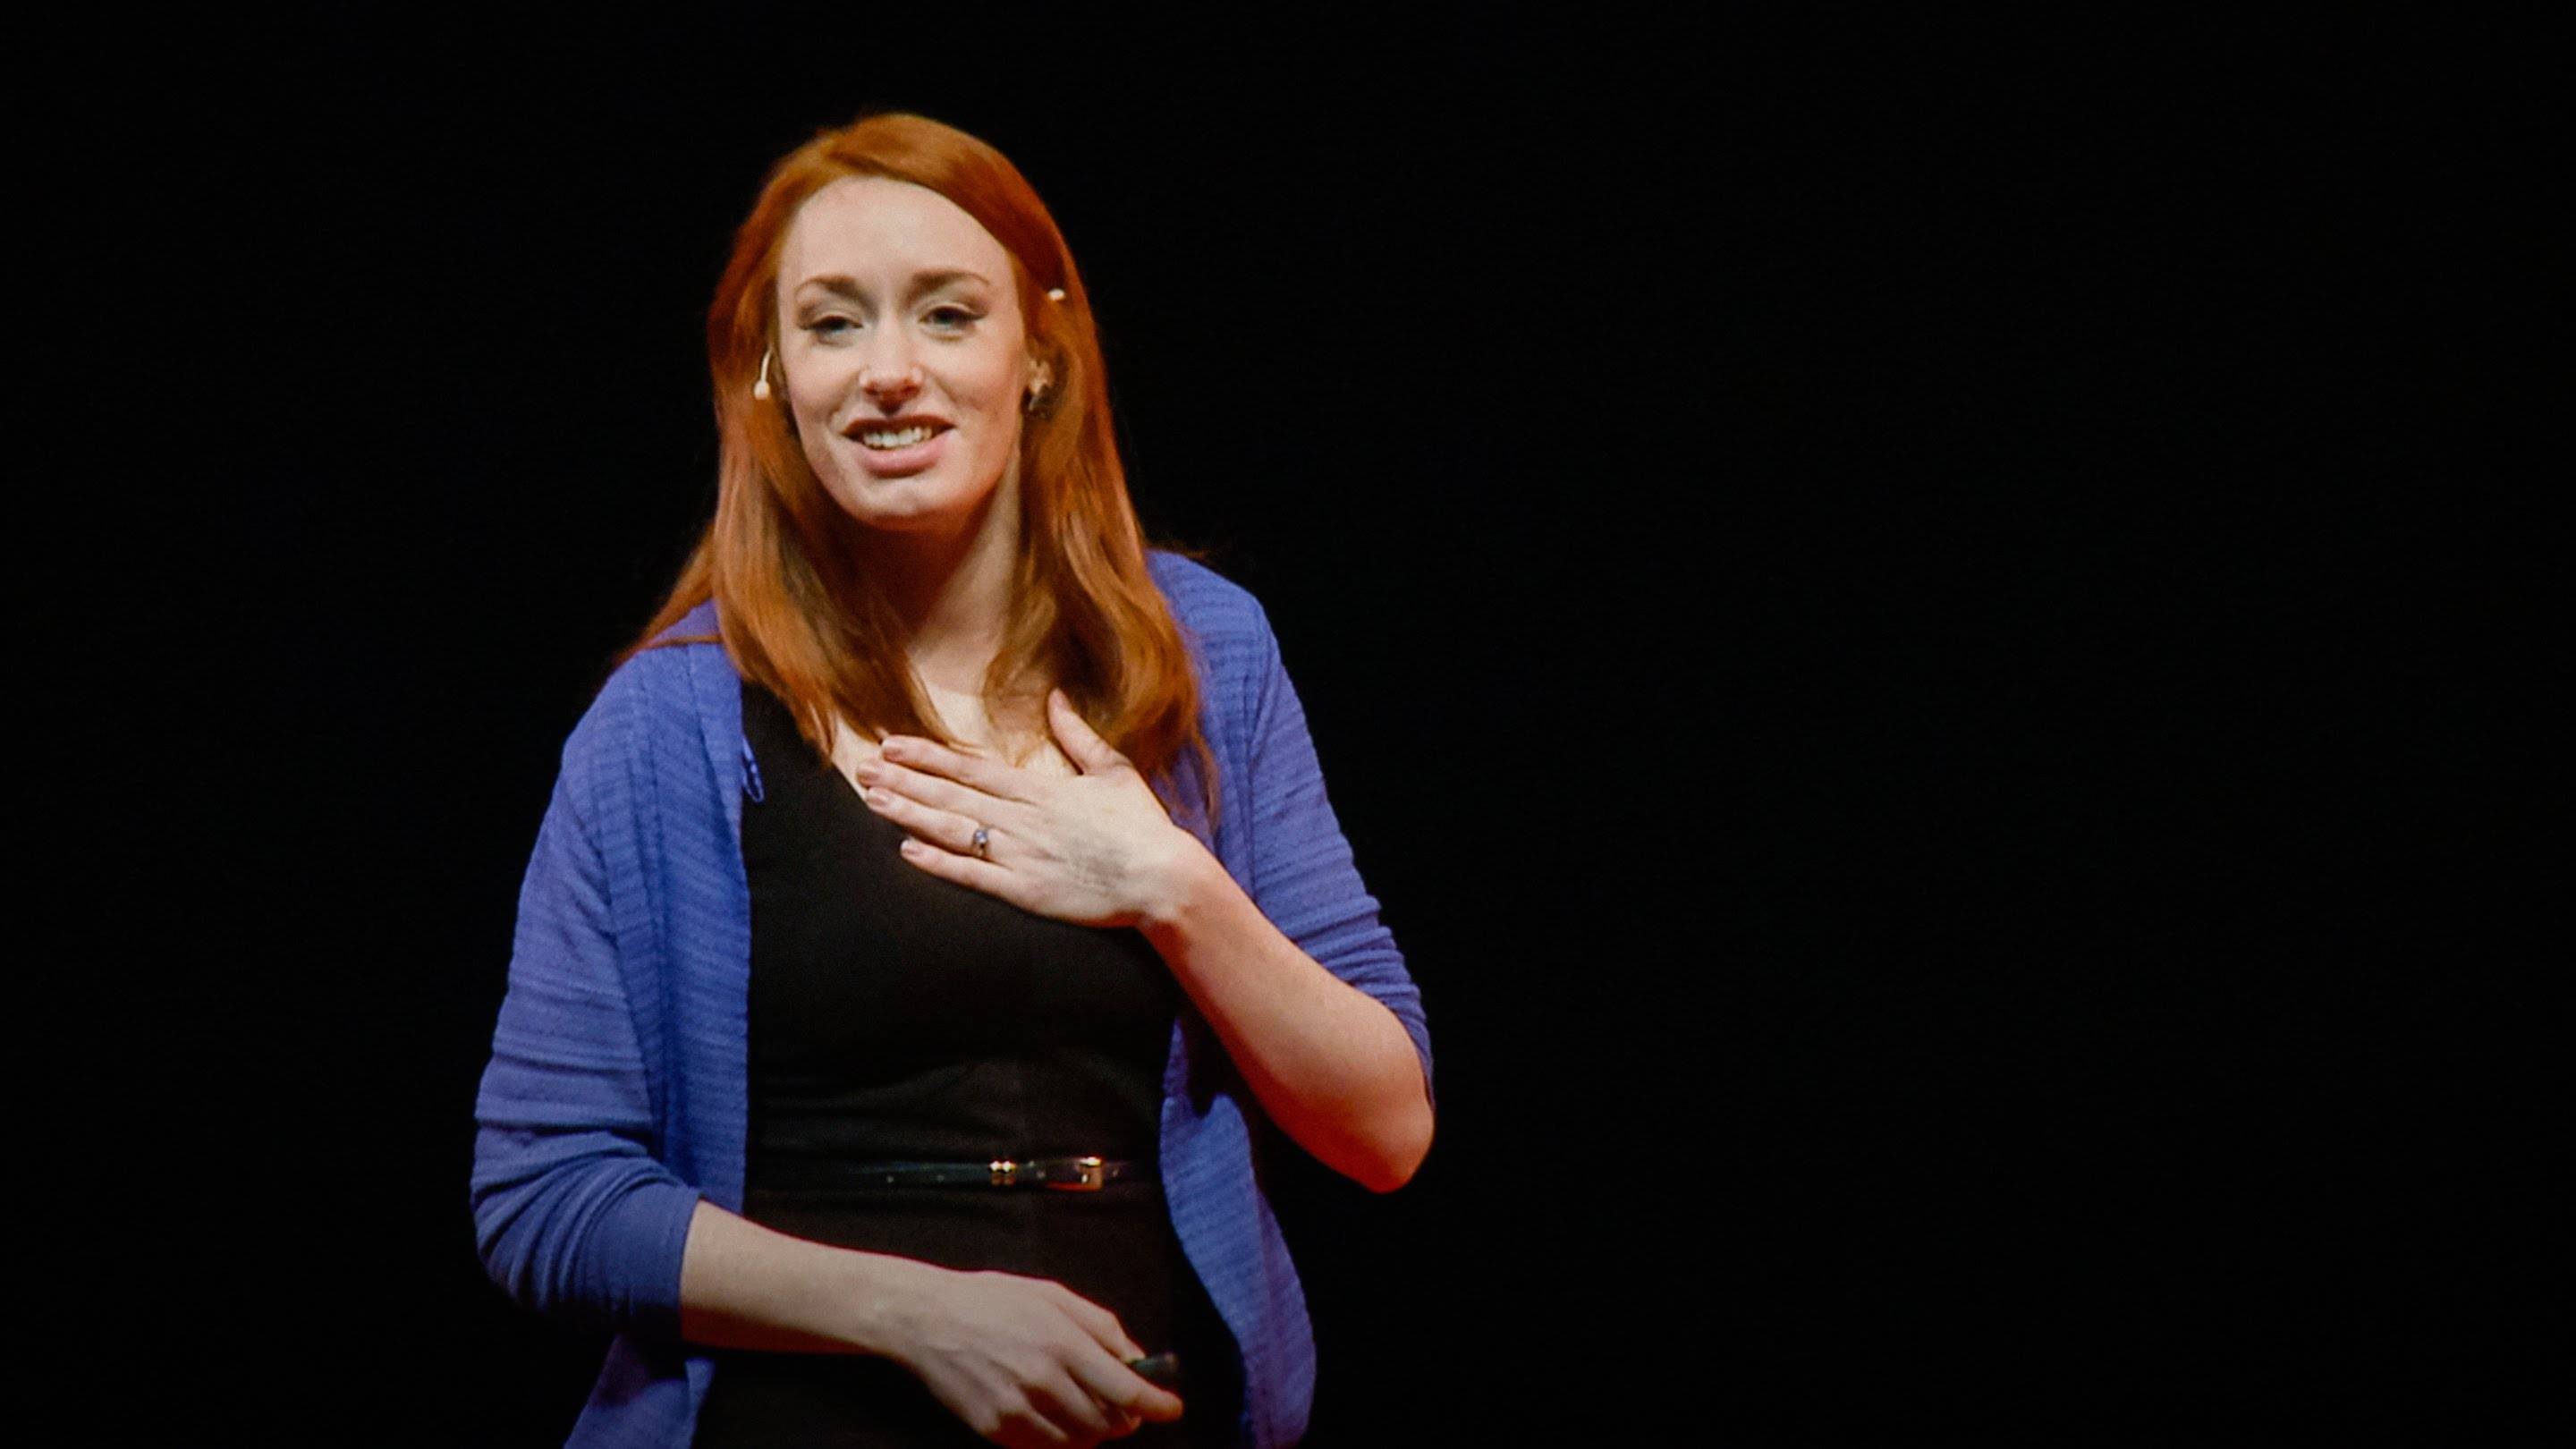 Dr Hannah Fry We Need To Be Wary Of Algorithms Behind Closed Doors 